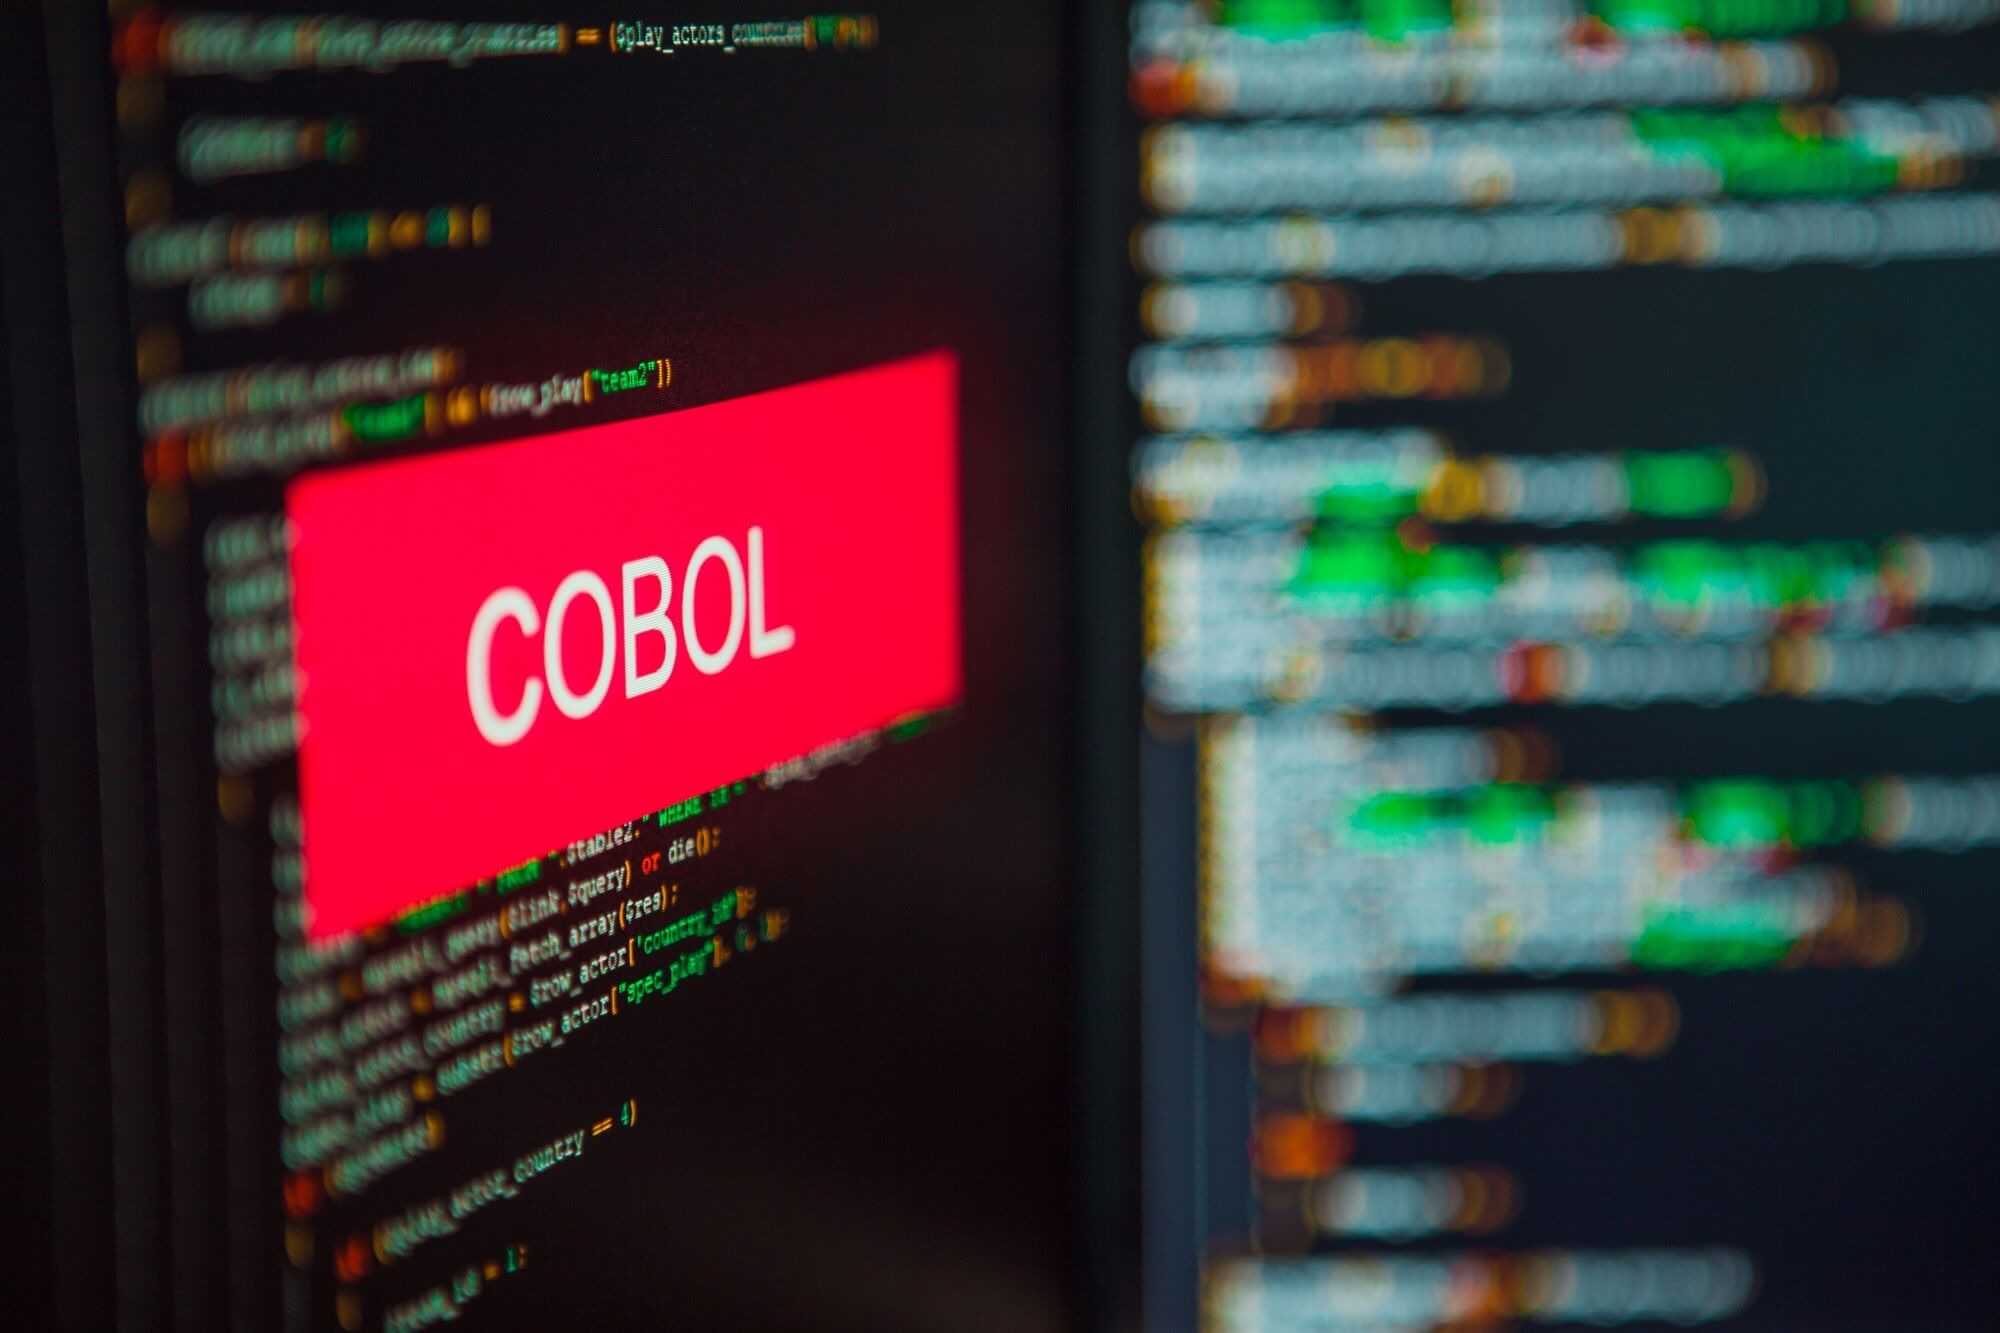 With US states desperate for COBOL programmers, IBM is offering free training